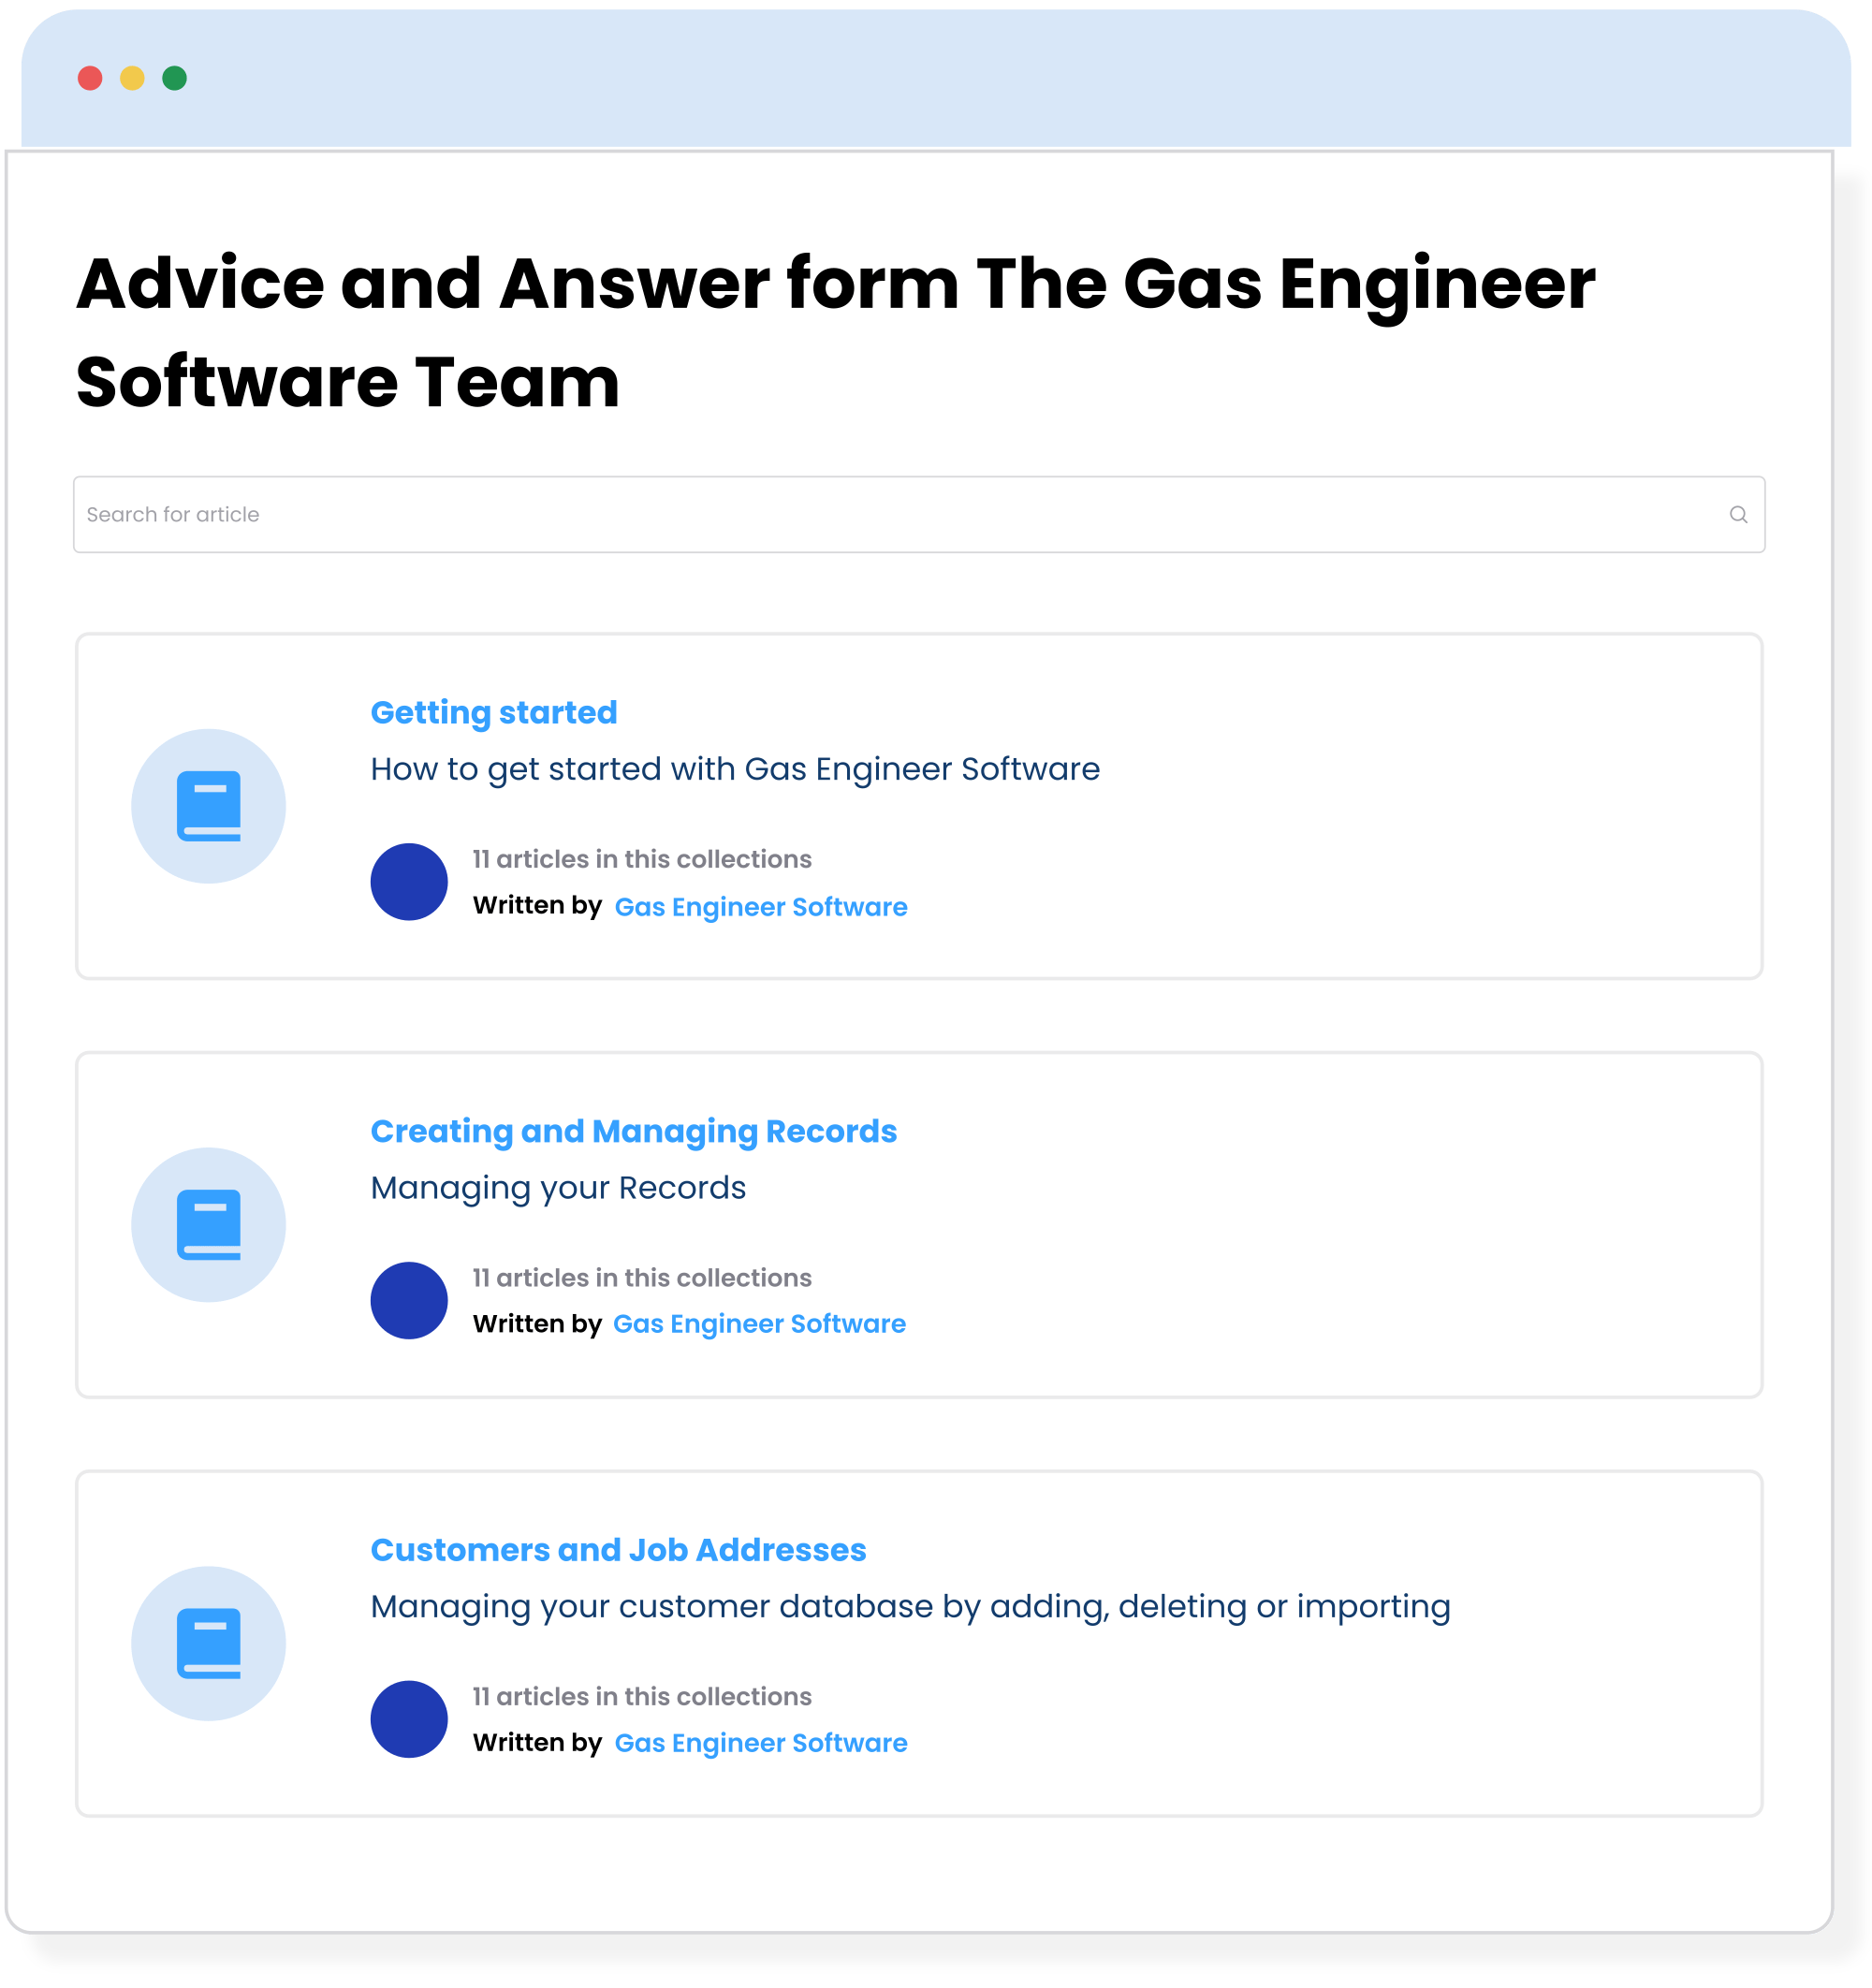 Get all your questions answered by the Gas Engineer Software team